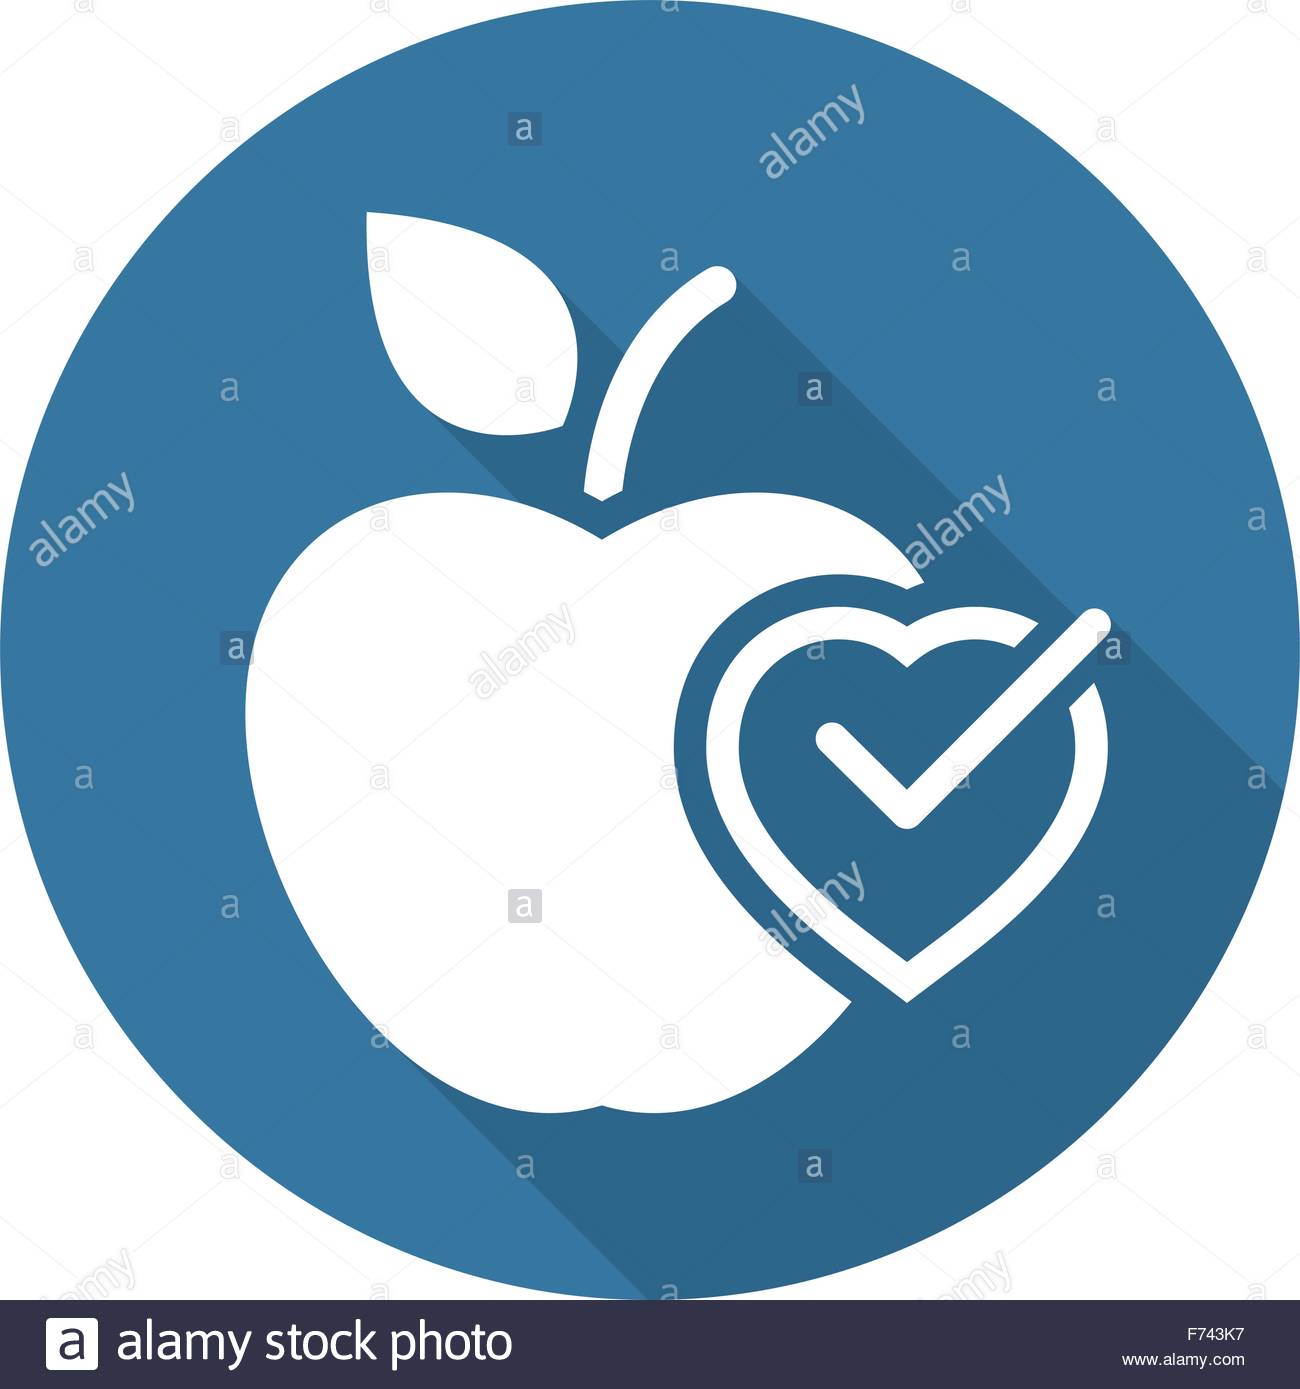 Apple, diet, food, fruit, healthy eating icon | Icon search engine